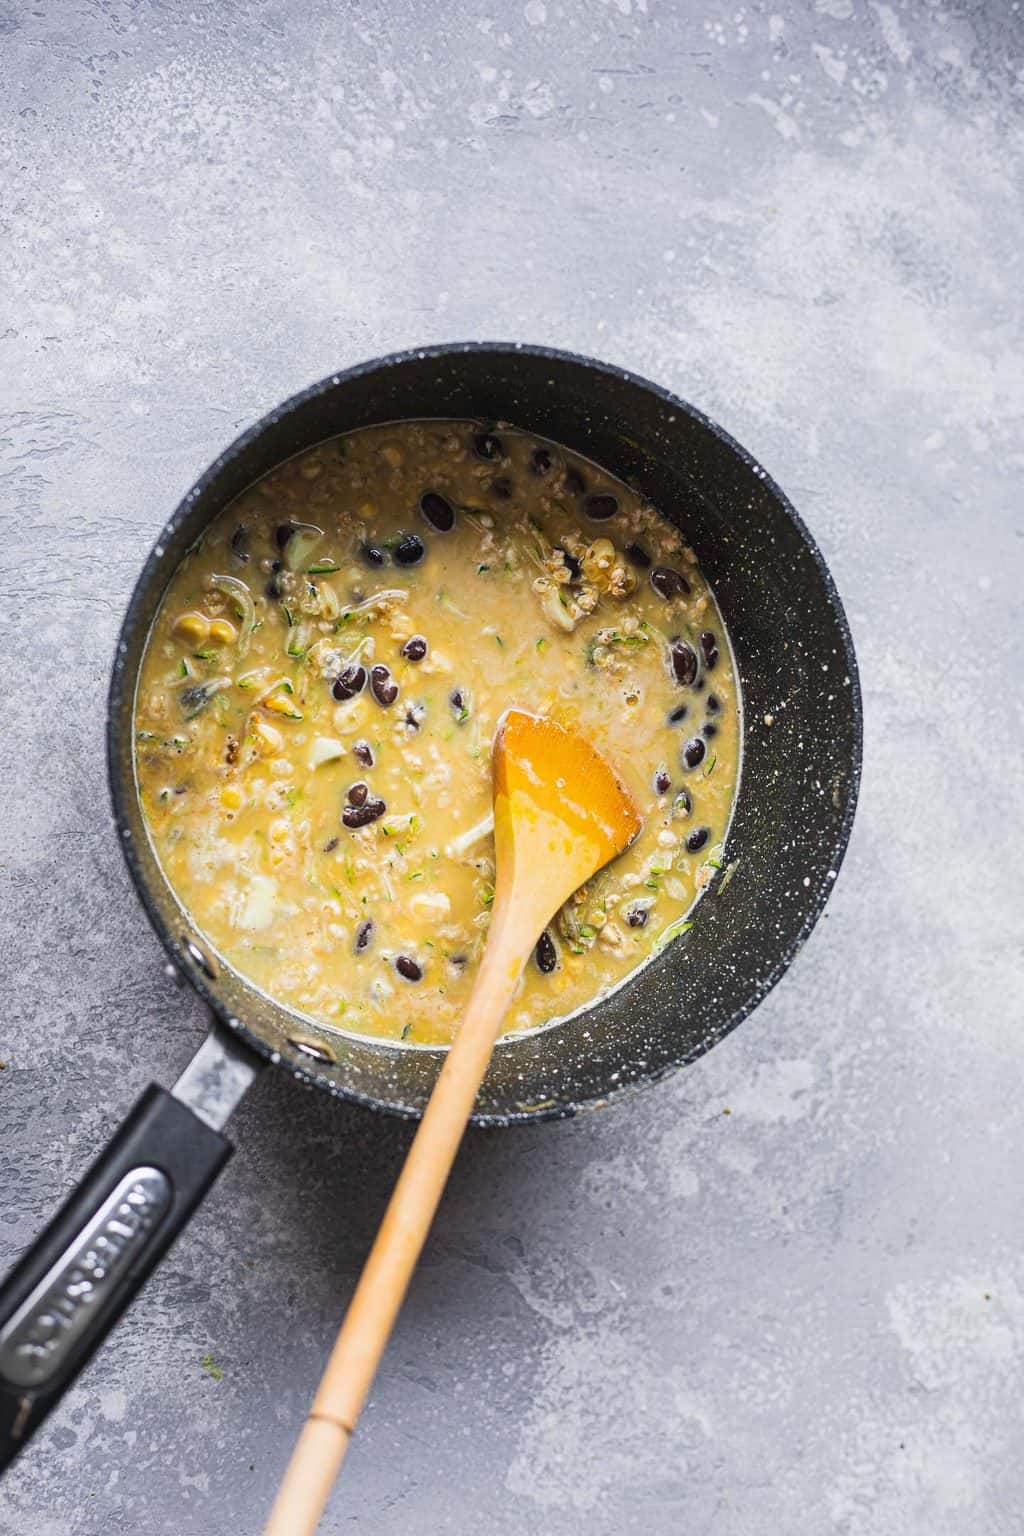 Oats with black beans in a saucepan